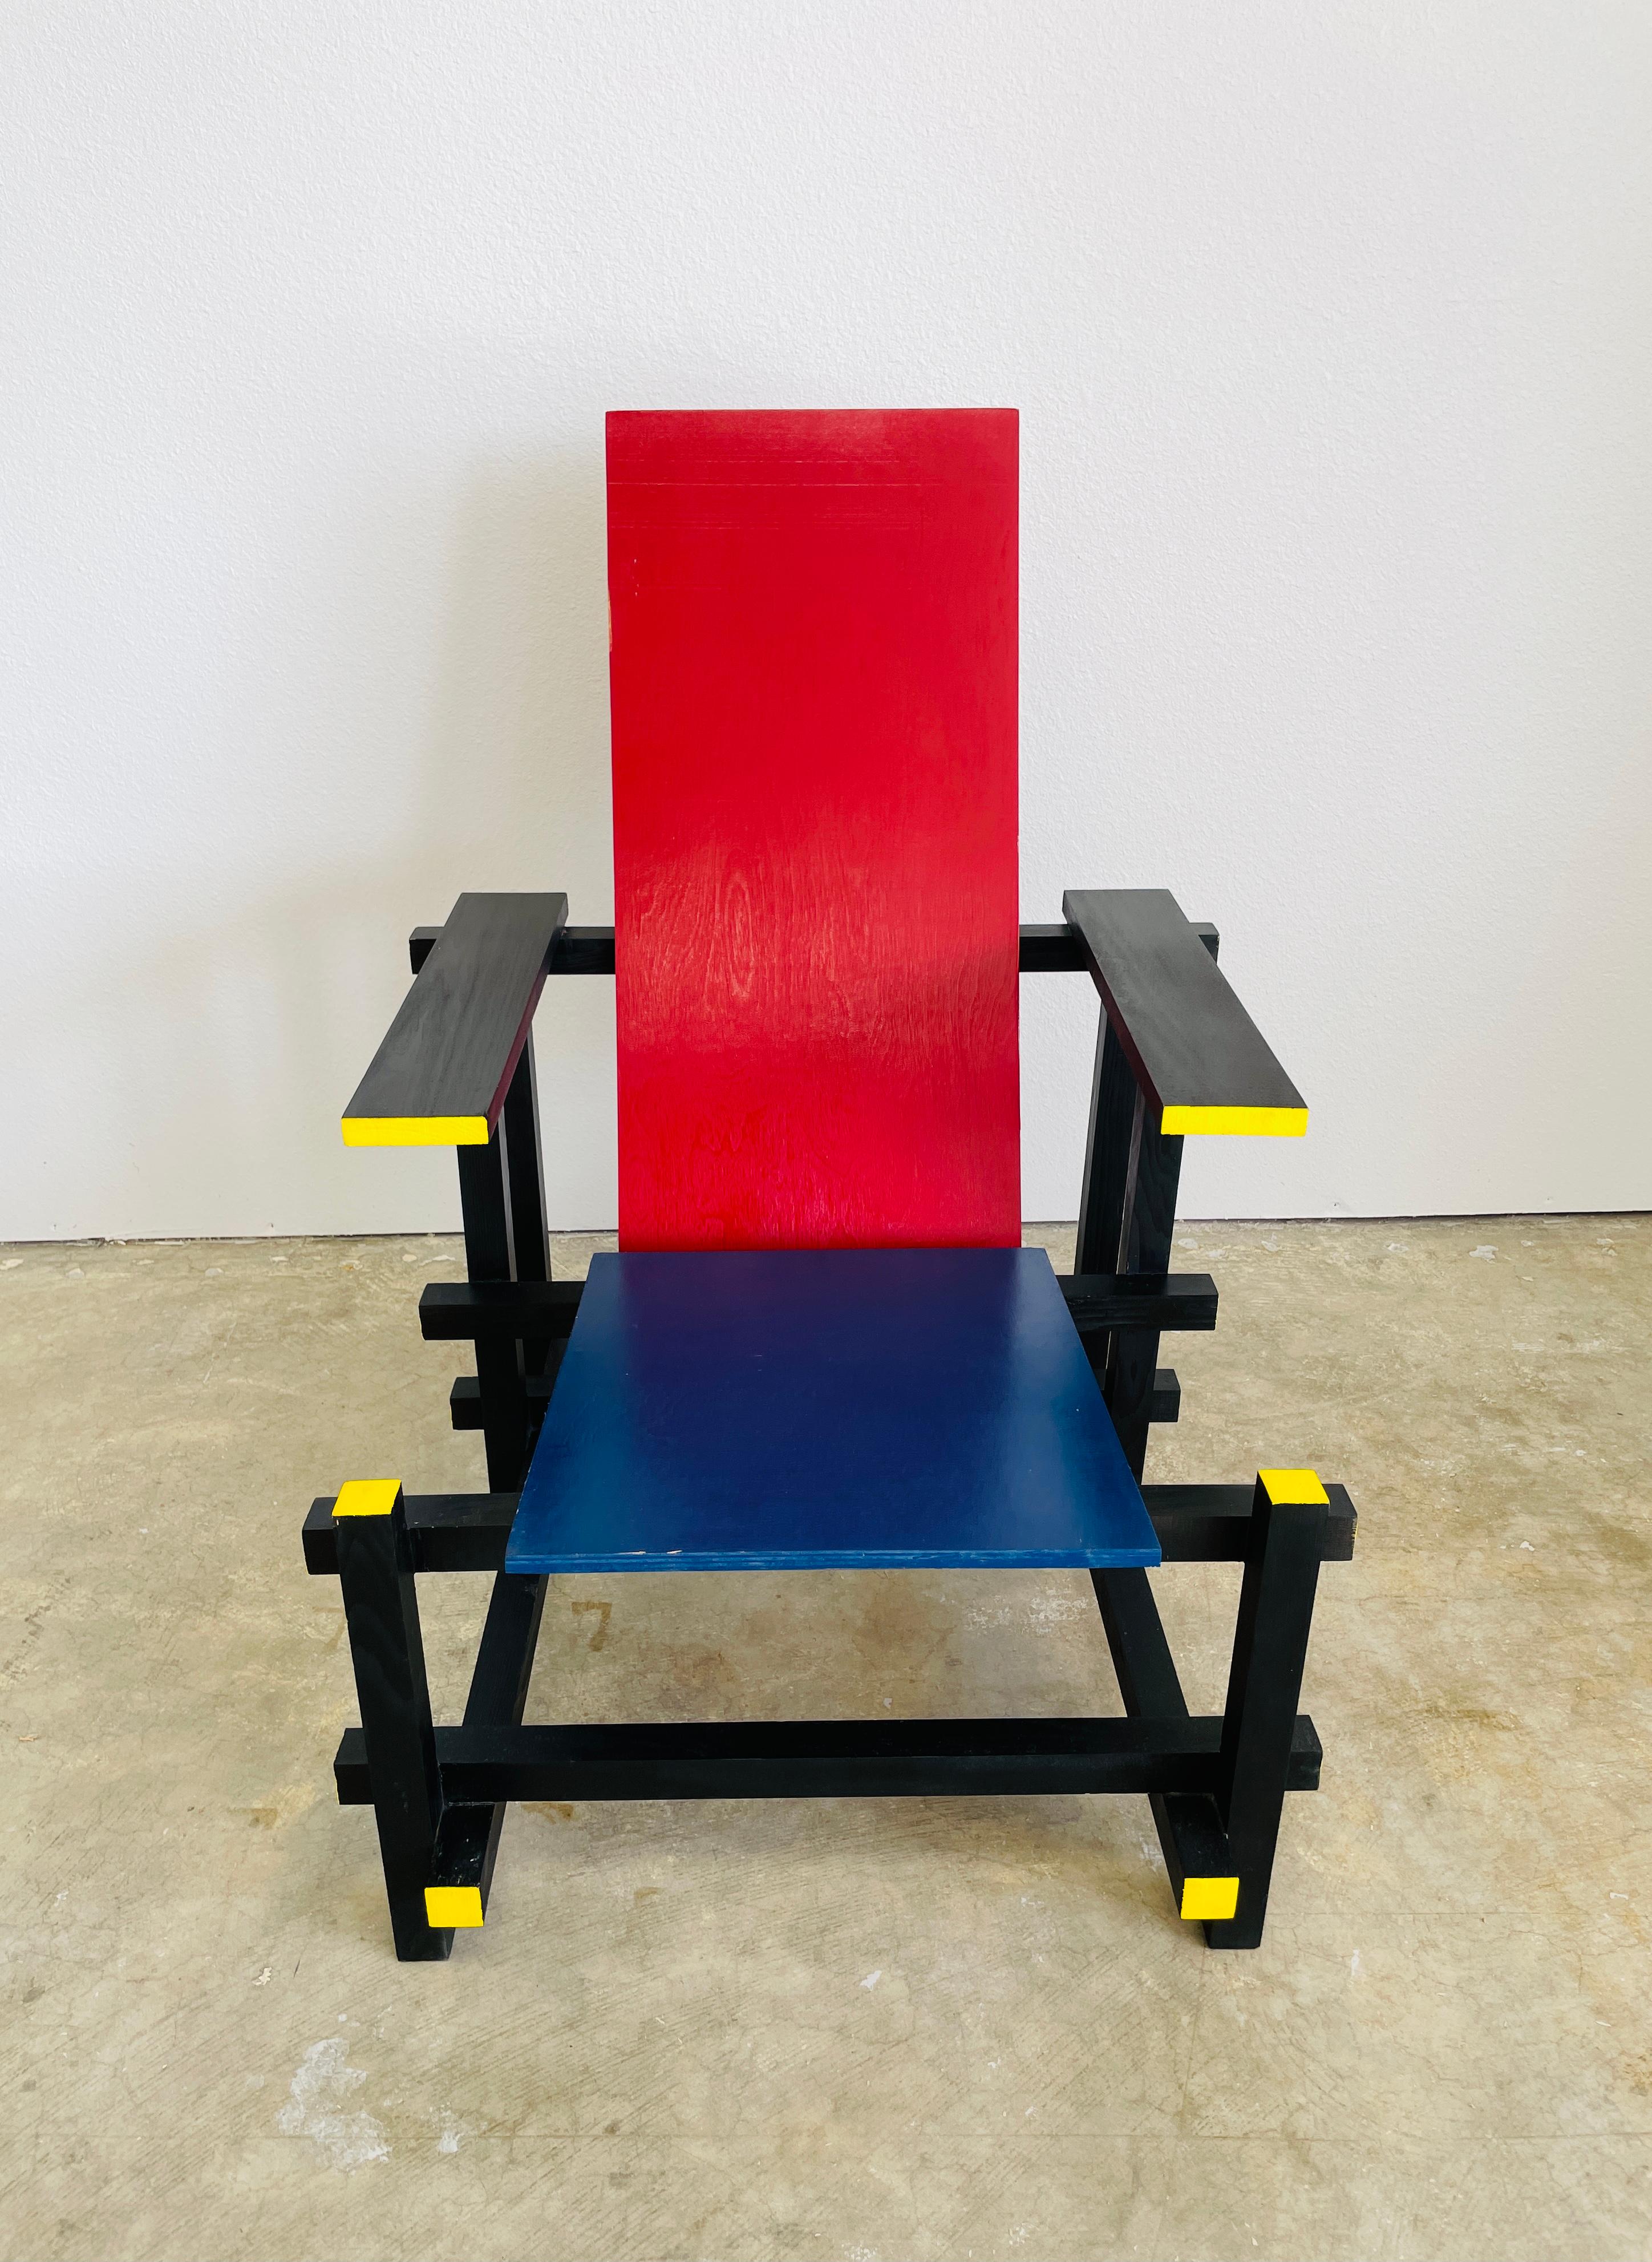 Vintage Gerrit Rietveld Style Inspired By Piet Mondrian Wood Chair.
This was remade by an architect in Wichita Falls, Kansas
Signed and dated 09/30/09

With its geometric composition and primary colors, the Red and Blue armchair has become the